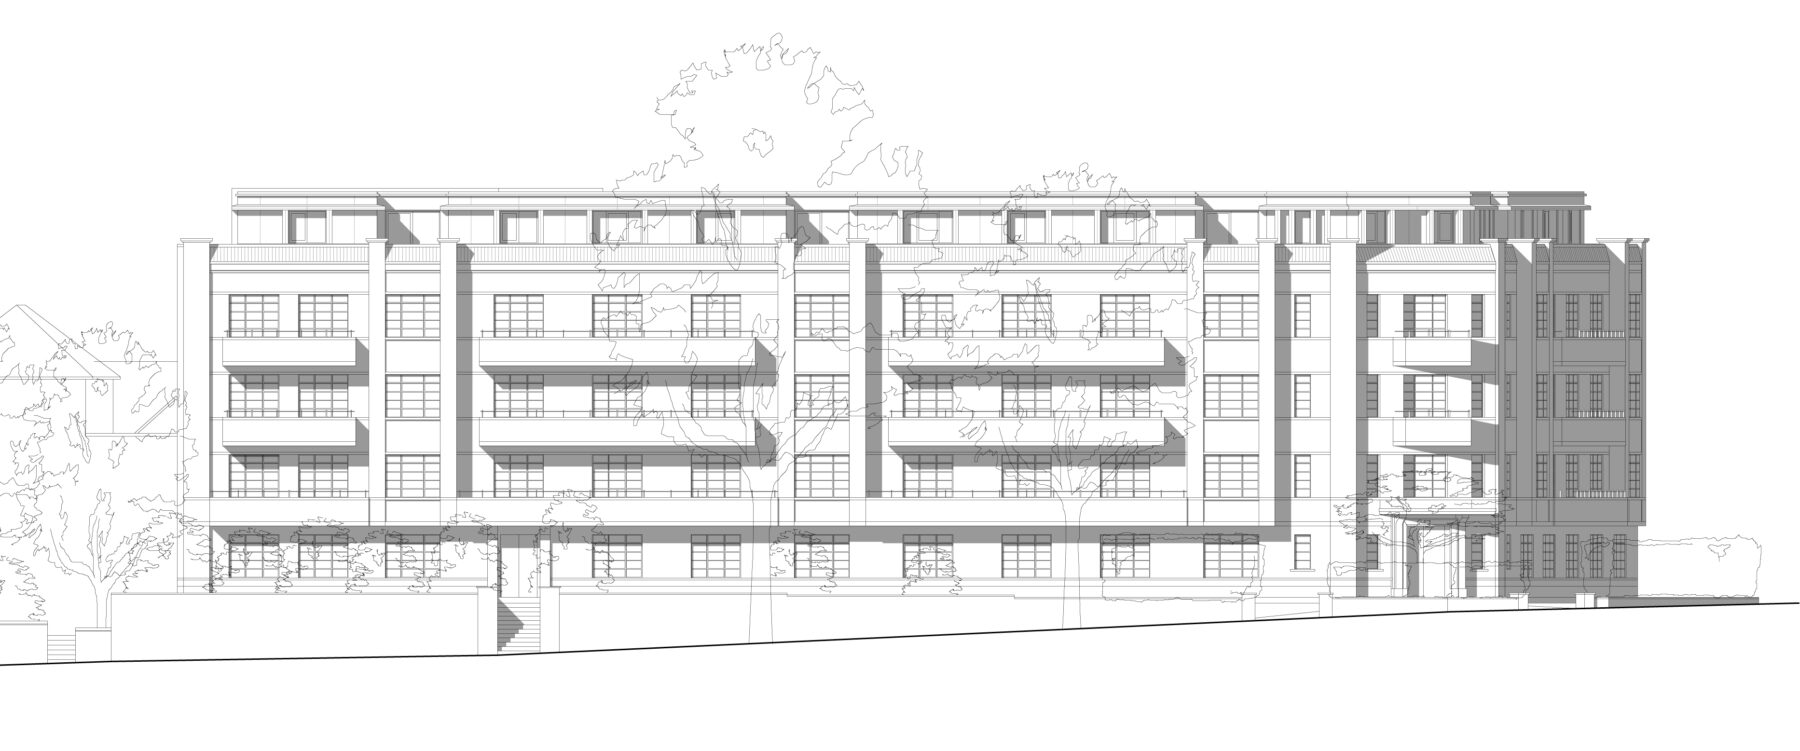 Front elevation of proposed development